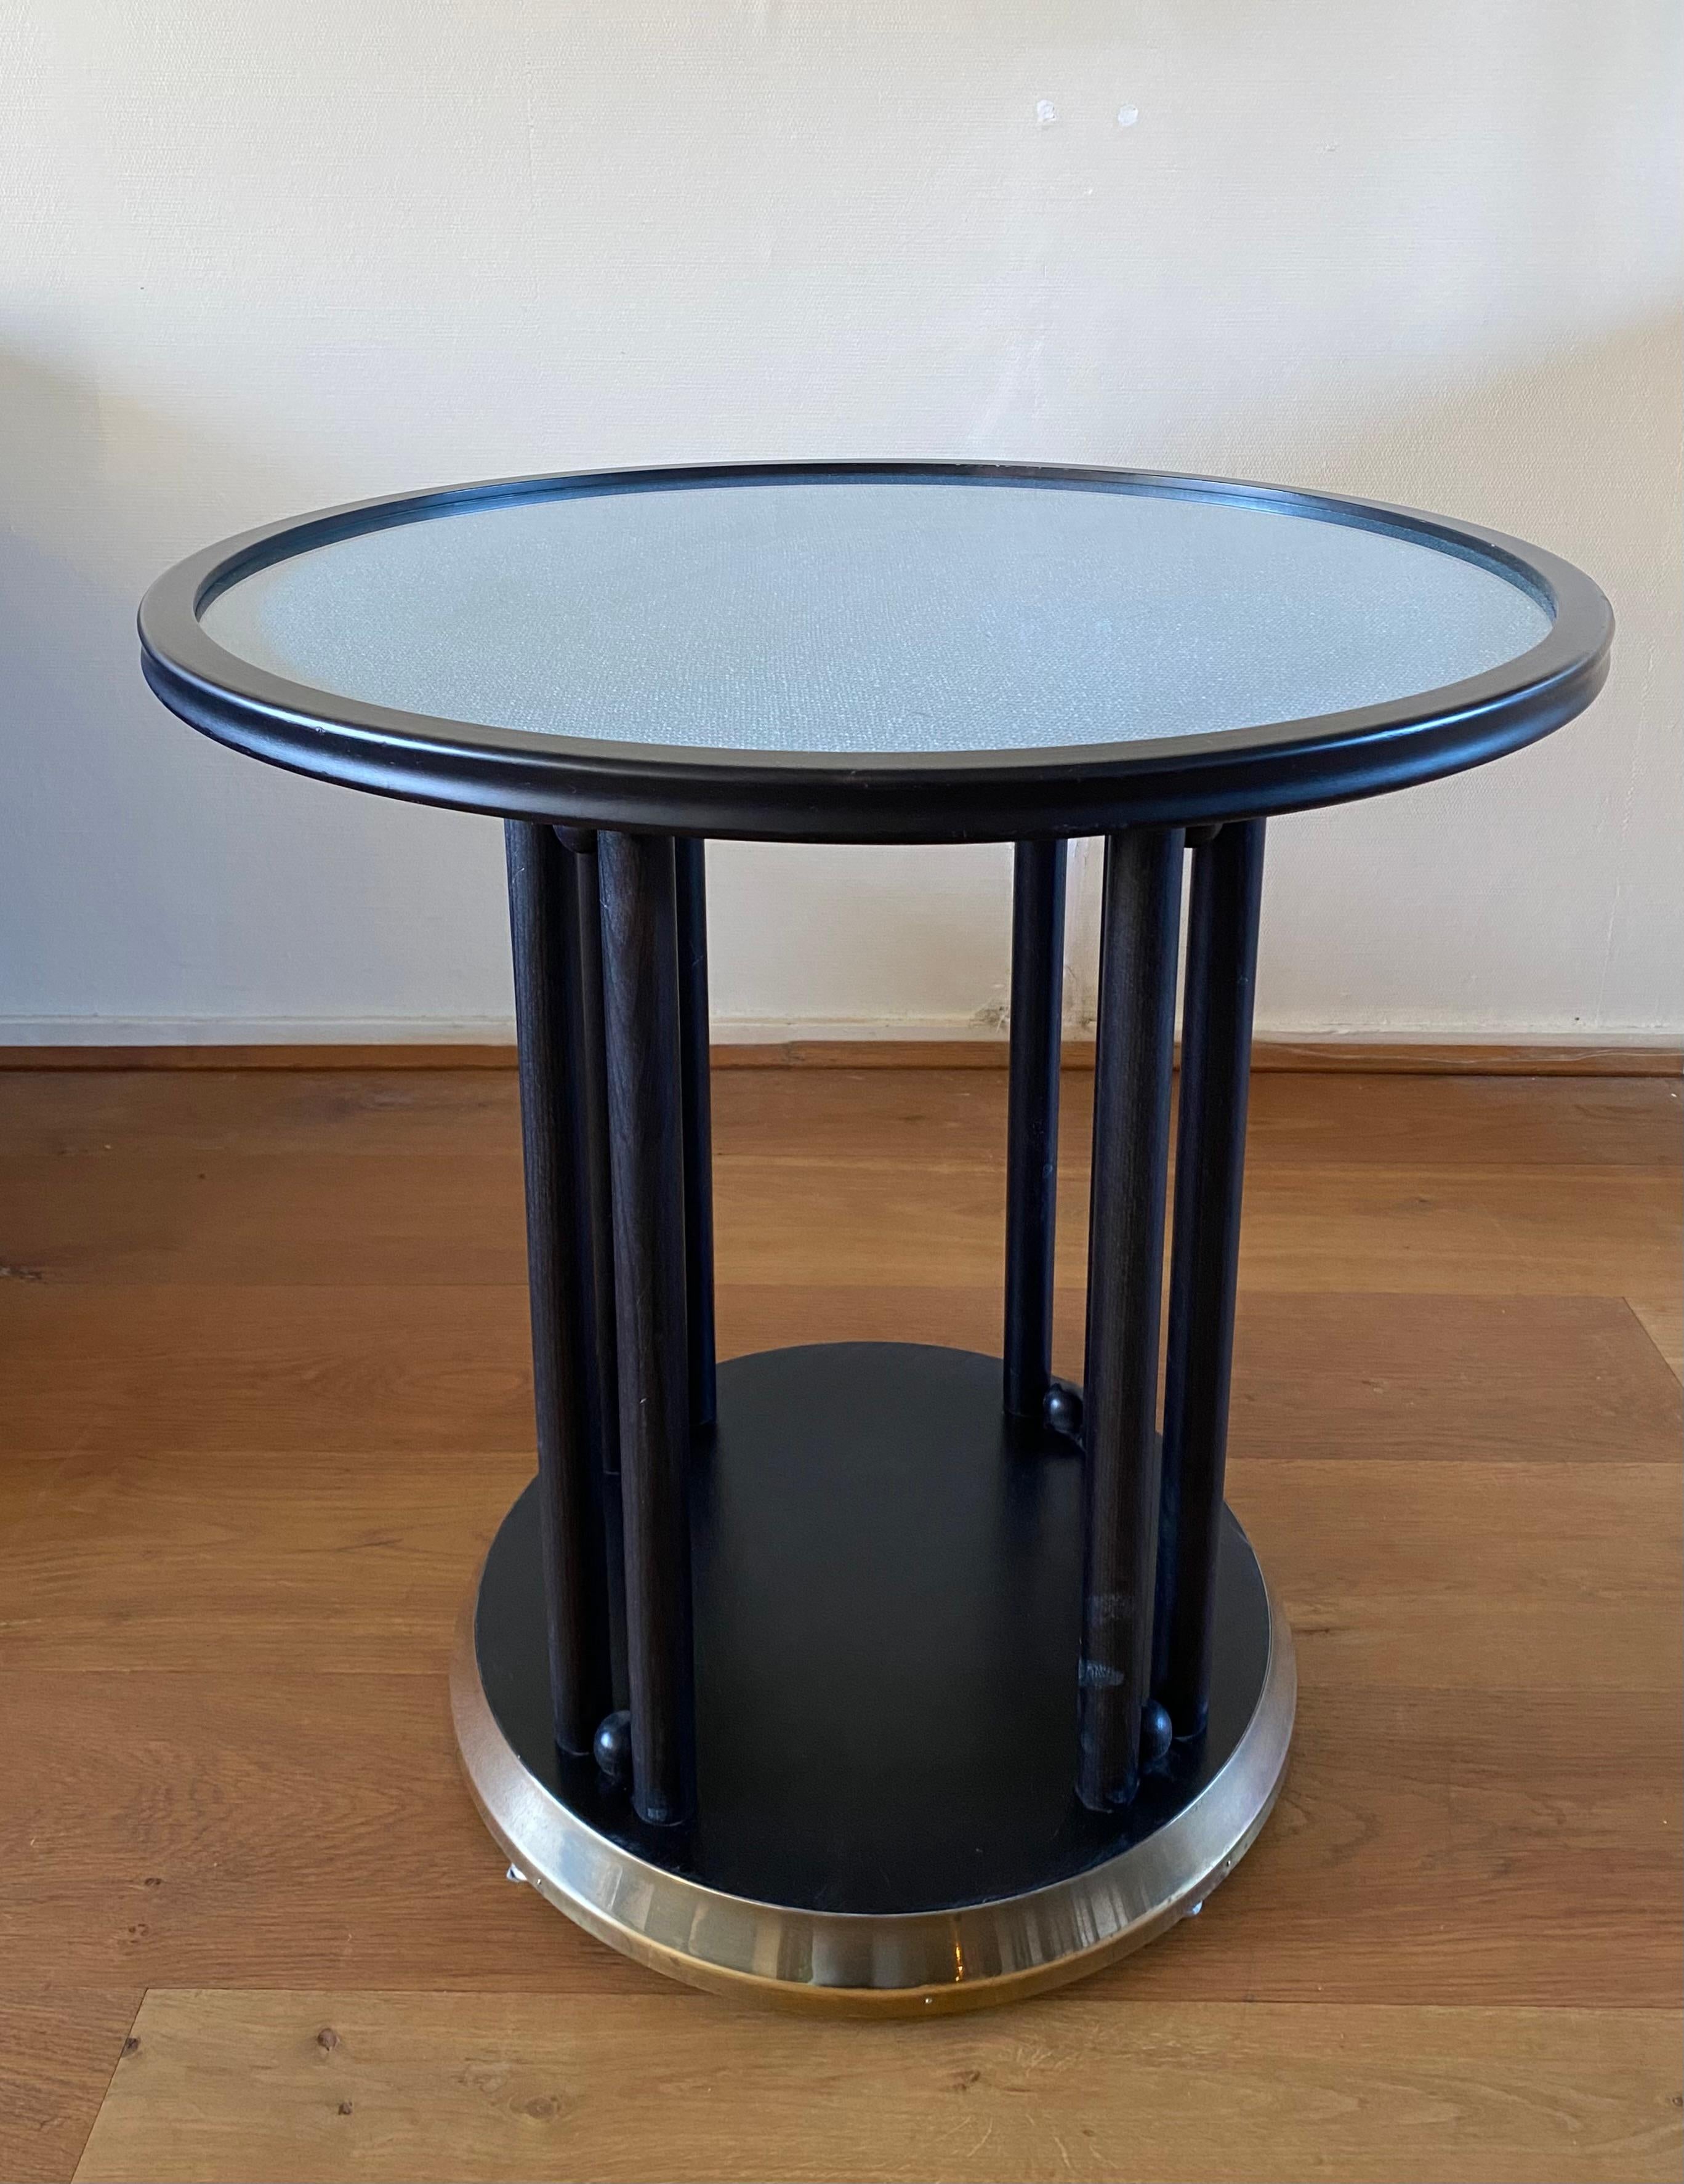 Impressive table, originally designed in 1907 by Josef Hoffman for the Cabaret Fledermaus and manufactured in the 1960s by the Austrian manufacturer, Wittmann. The table features a beechwood frame with a brass-lined base and glass top. Underneath